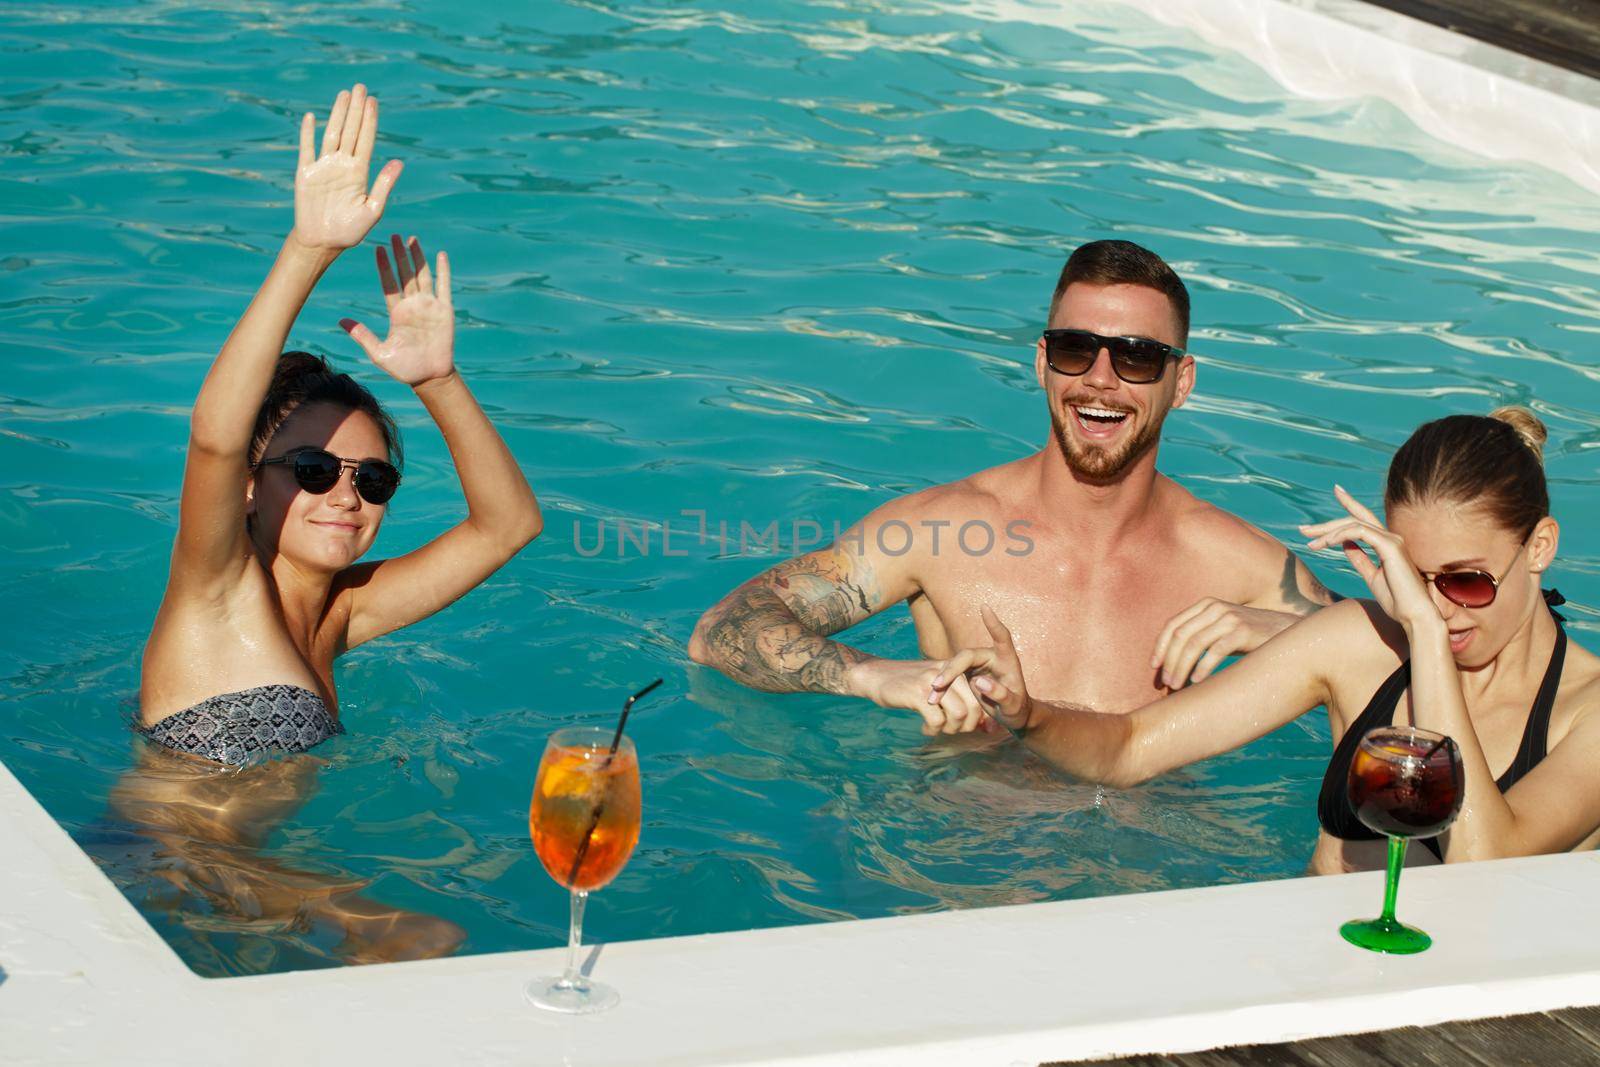 Group of friends dancing in the water at the pool party. Cheerful young people having drinks, laughing joyfully, enjoying hot summer day at the swimming pool. Entertainment, happiness, travel concept